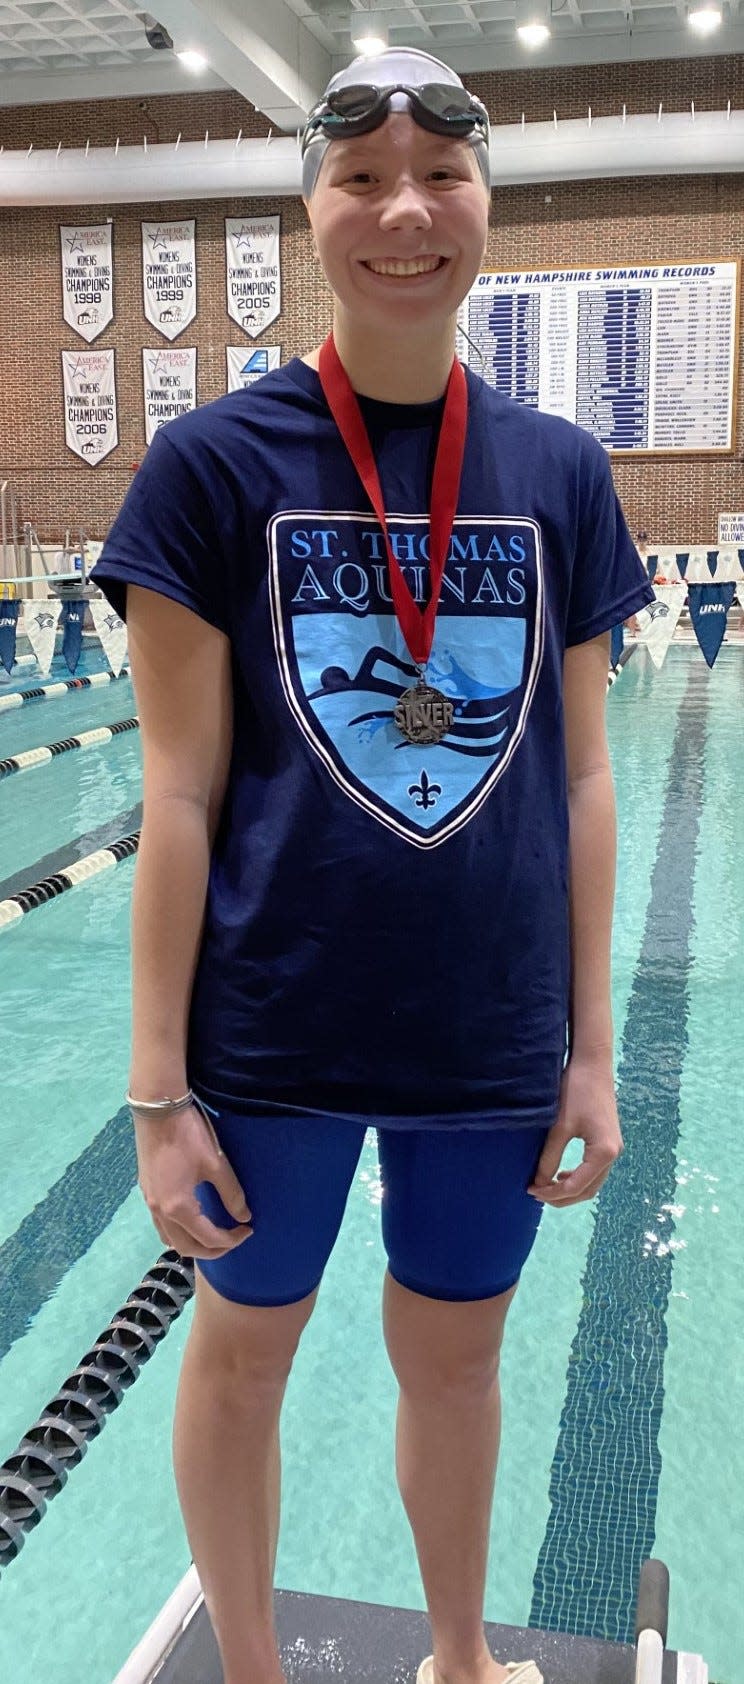 St. Thomas Aquinas' Morgan Batchelder placed second in the 100-yard freestyle at Saturday's Division II state swim meet at the University of New Hampshire.